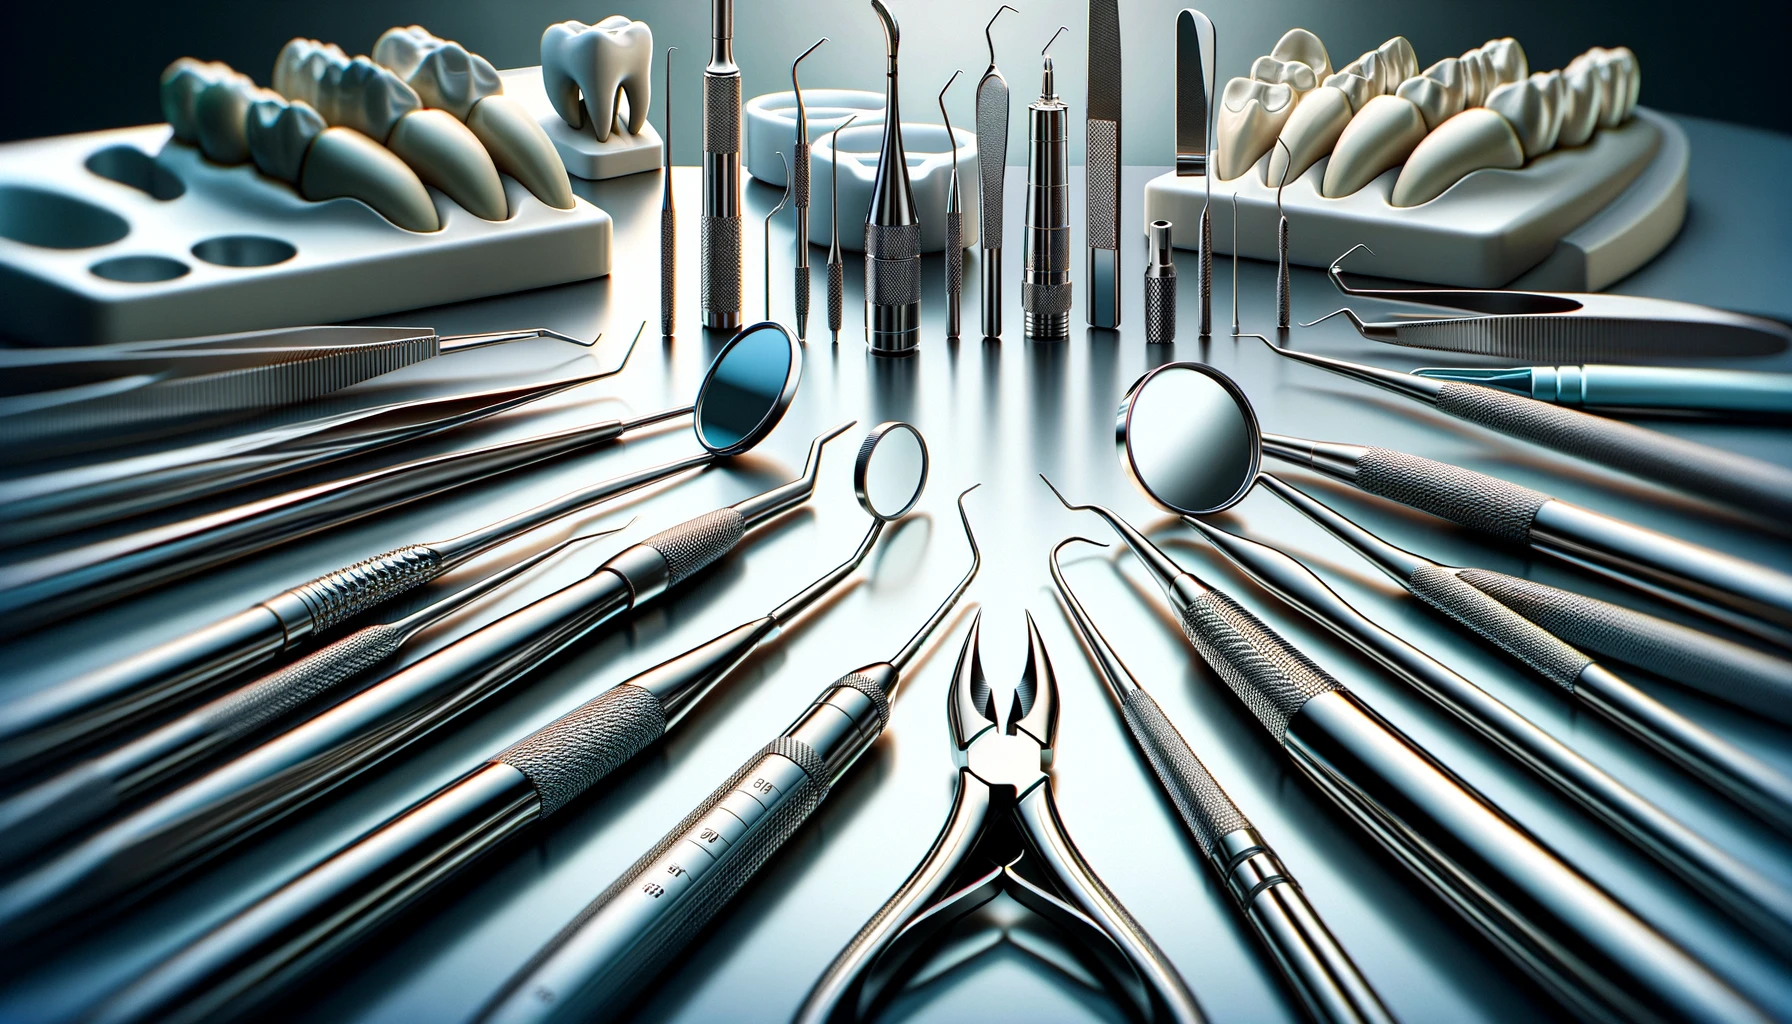 Selecting High-Quality Dental Instruments